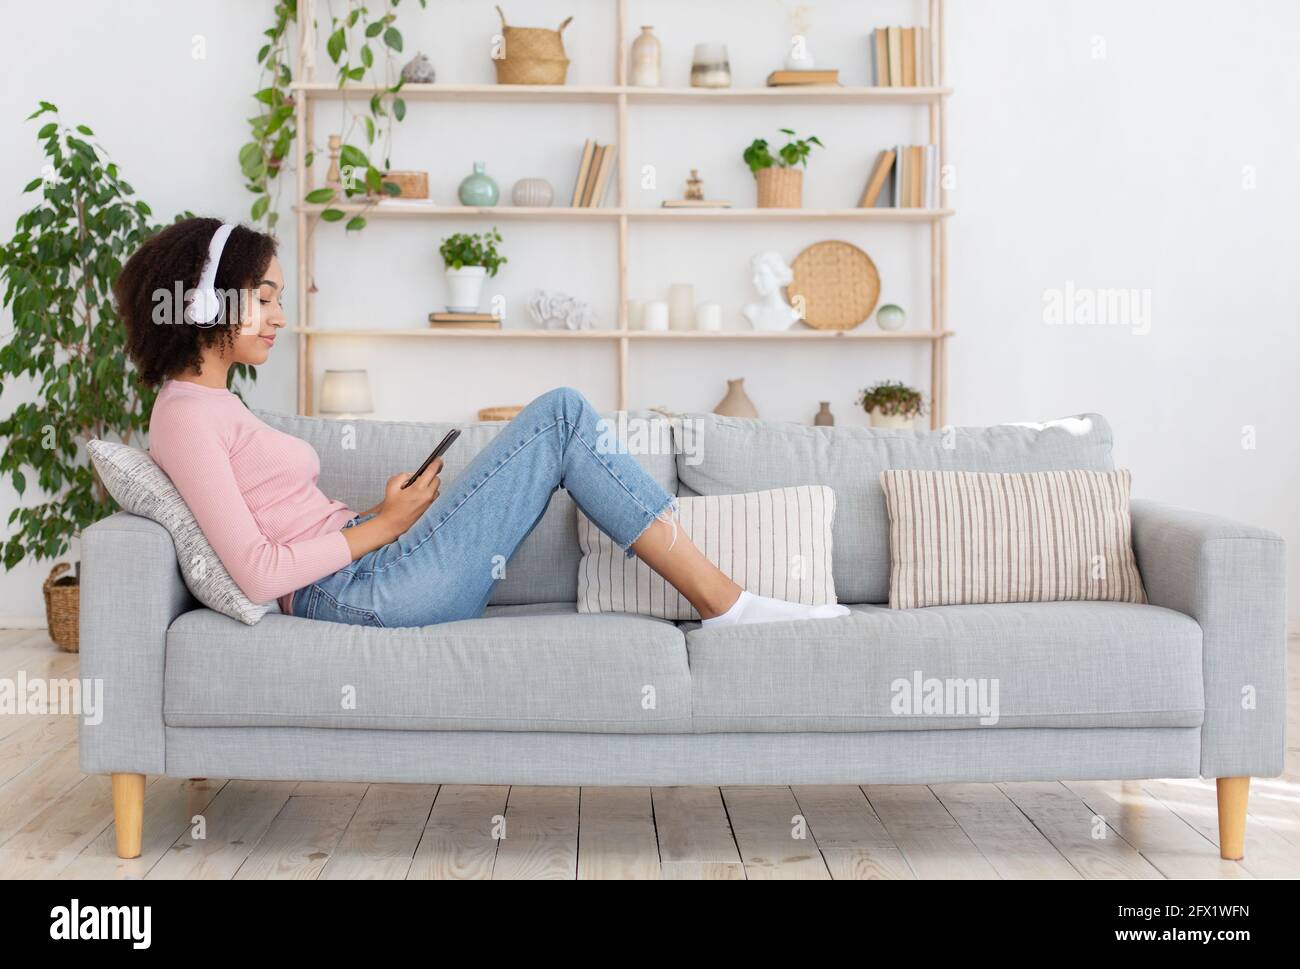 Free time, weekends, rest at home with devices during COVID-19 pandemic Stock Photo